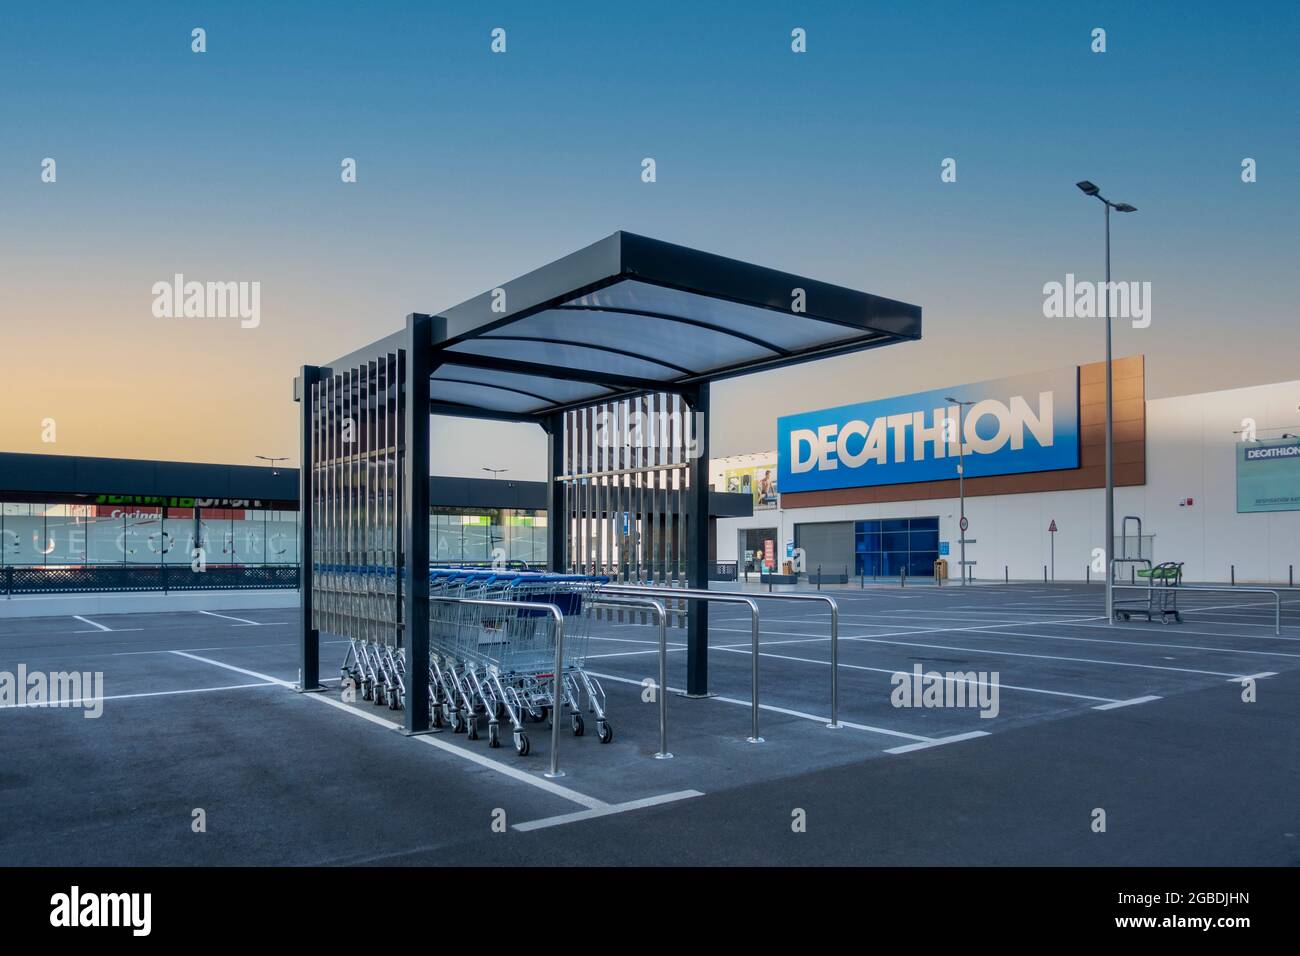 MADRID, SPAIN - JULY 16, 2021: Shopping carts in a shopping park, close to Decathlon shop Stock Photo